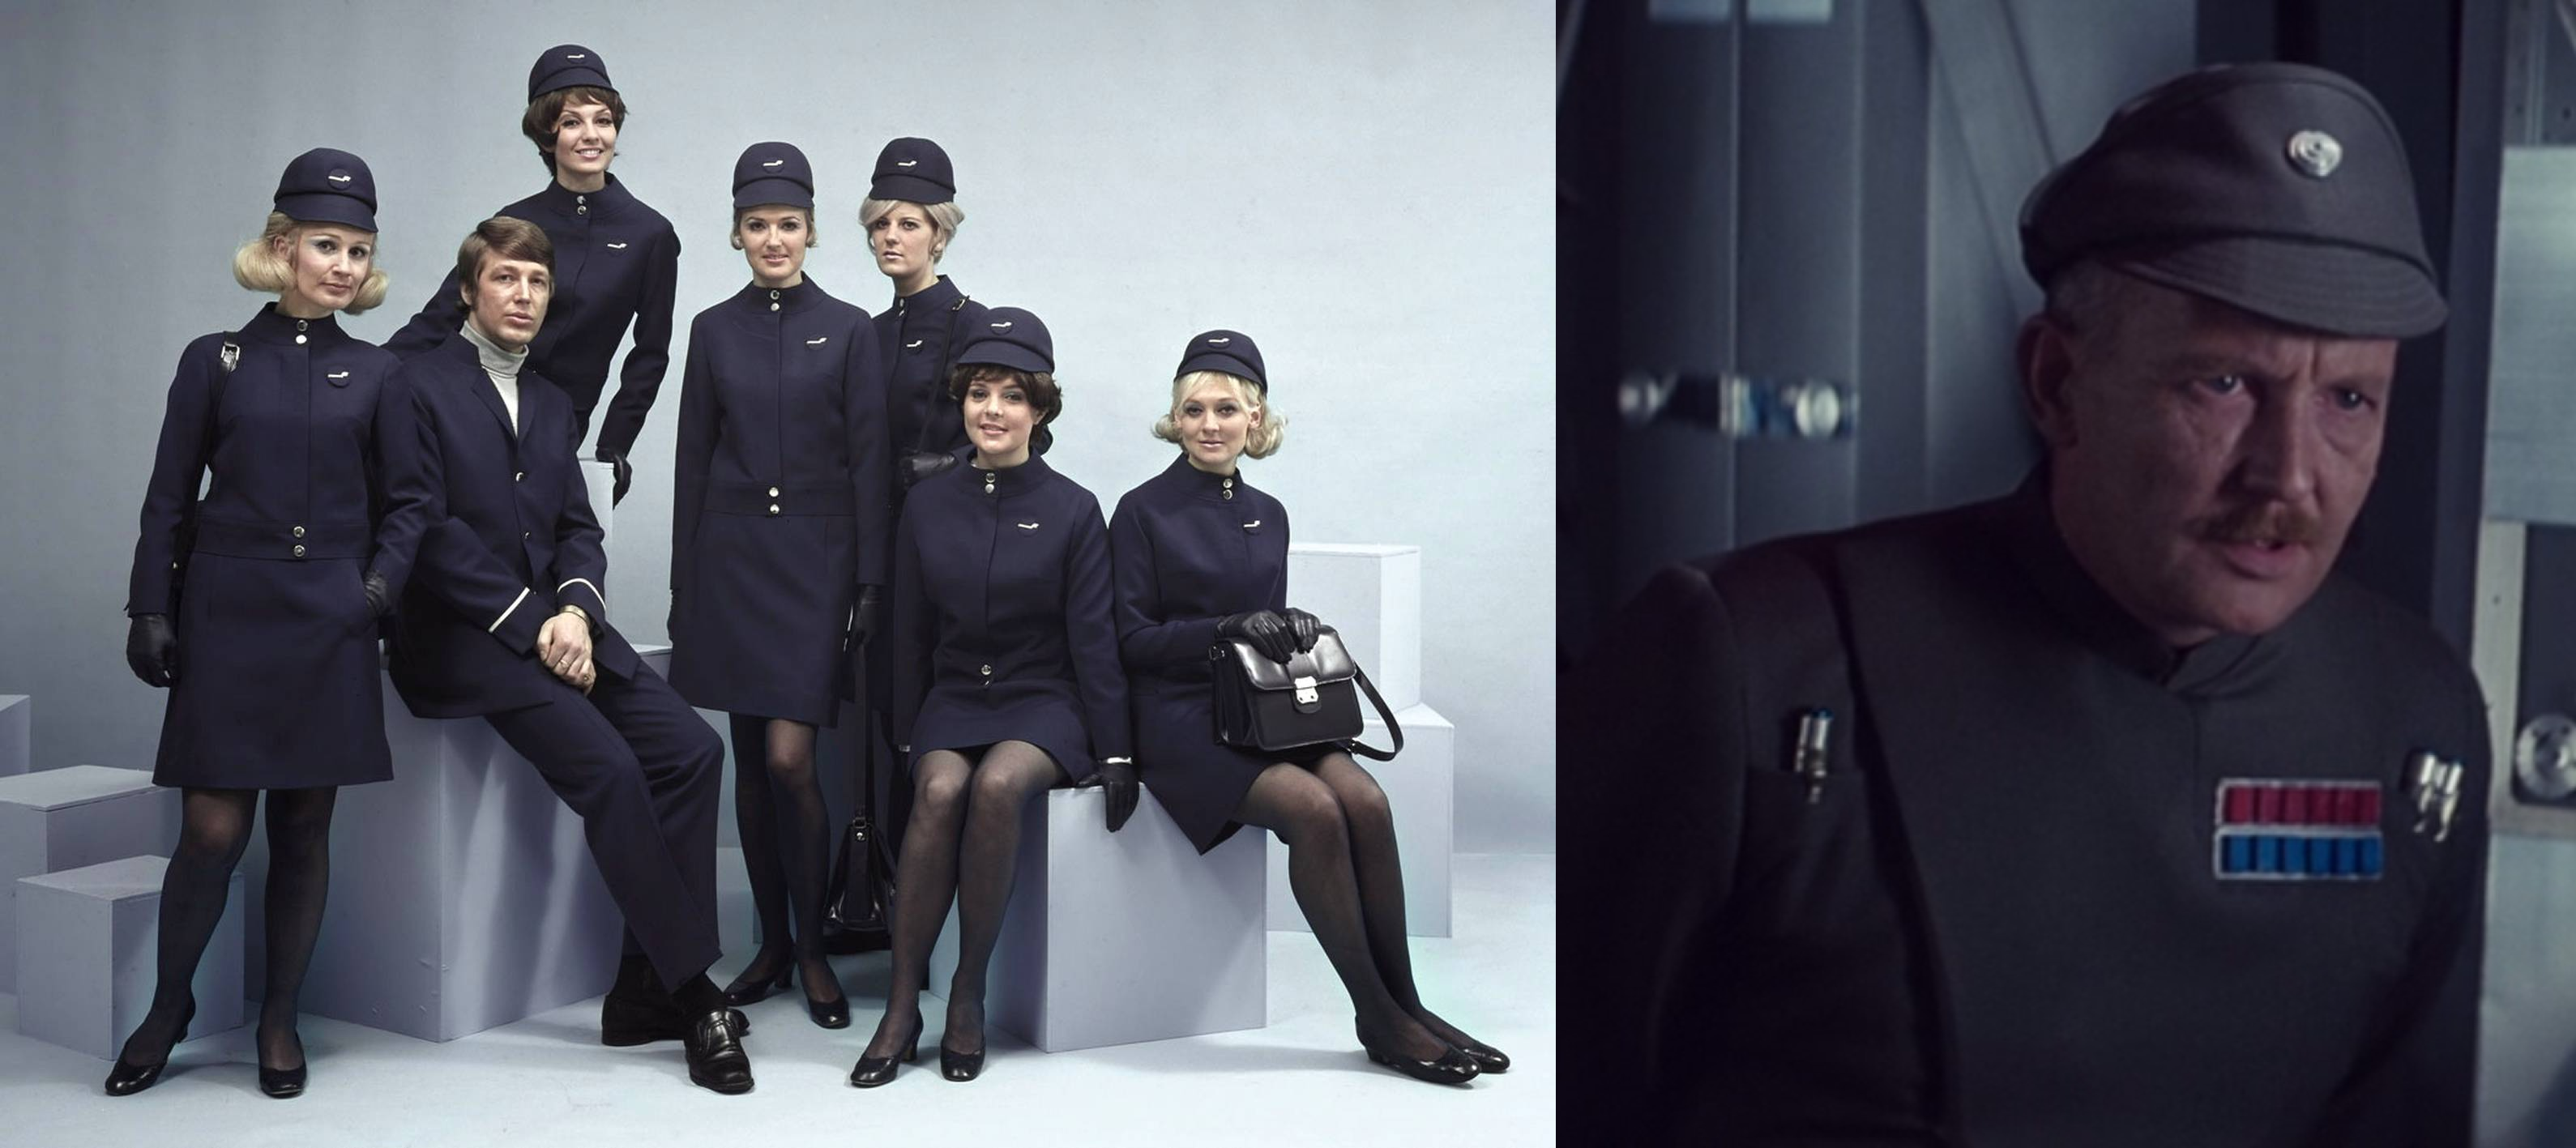 these Finnair hostesses.png